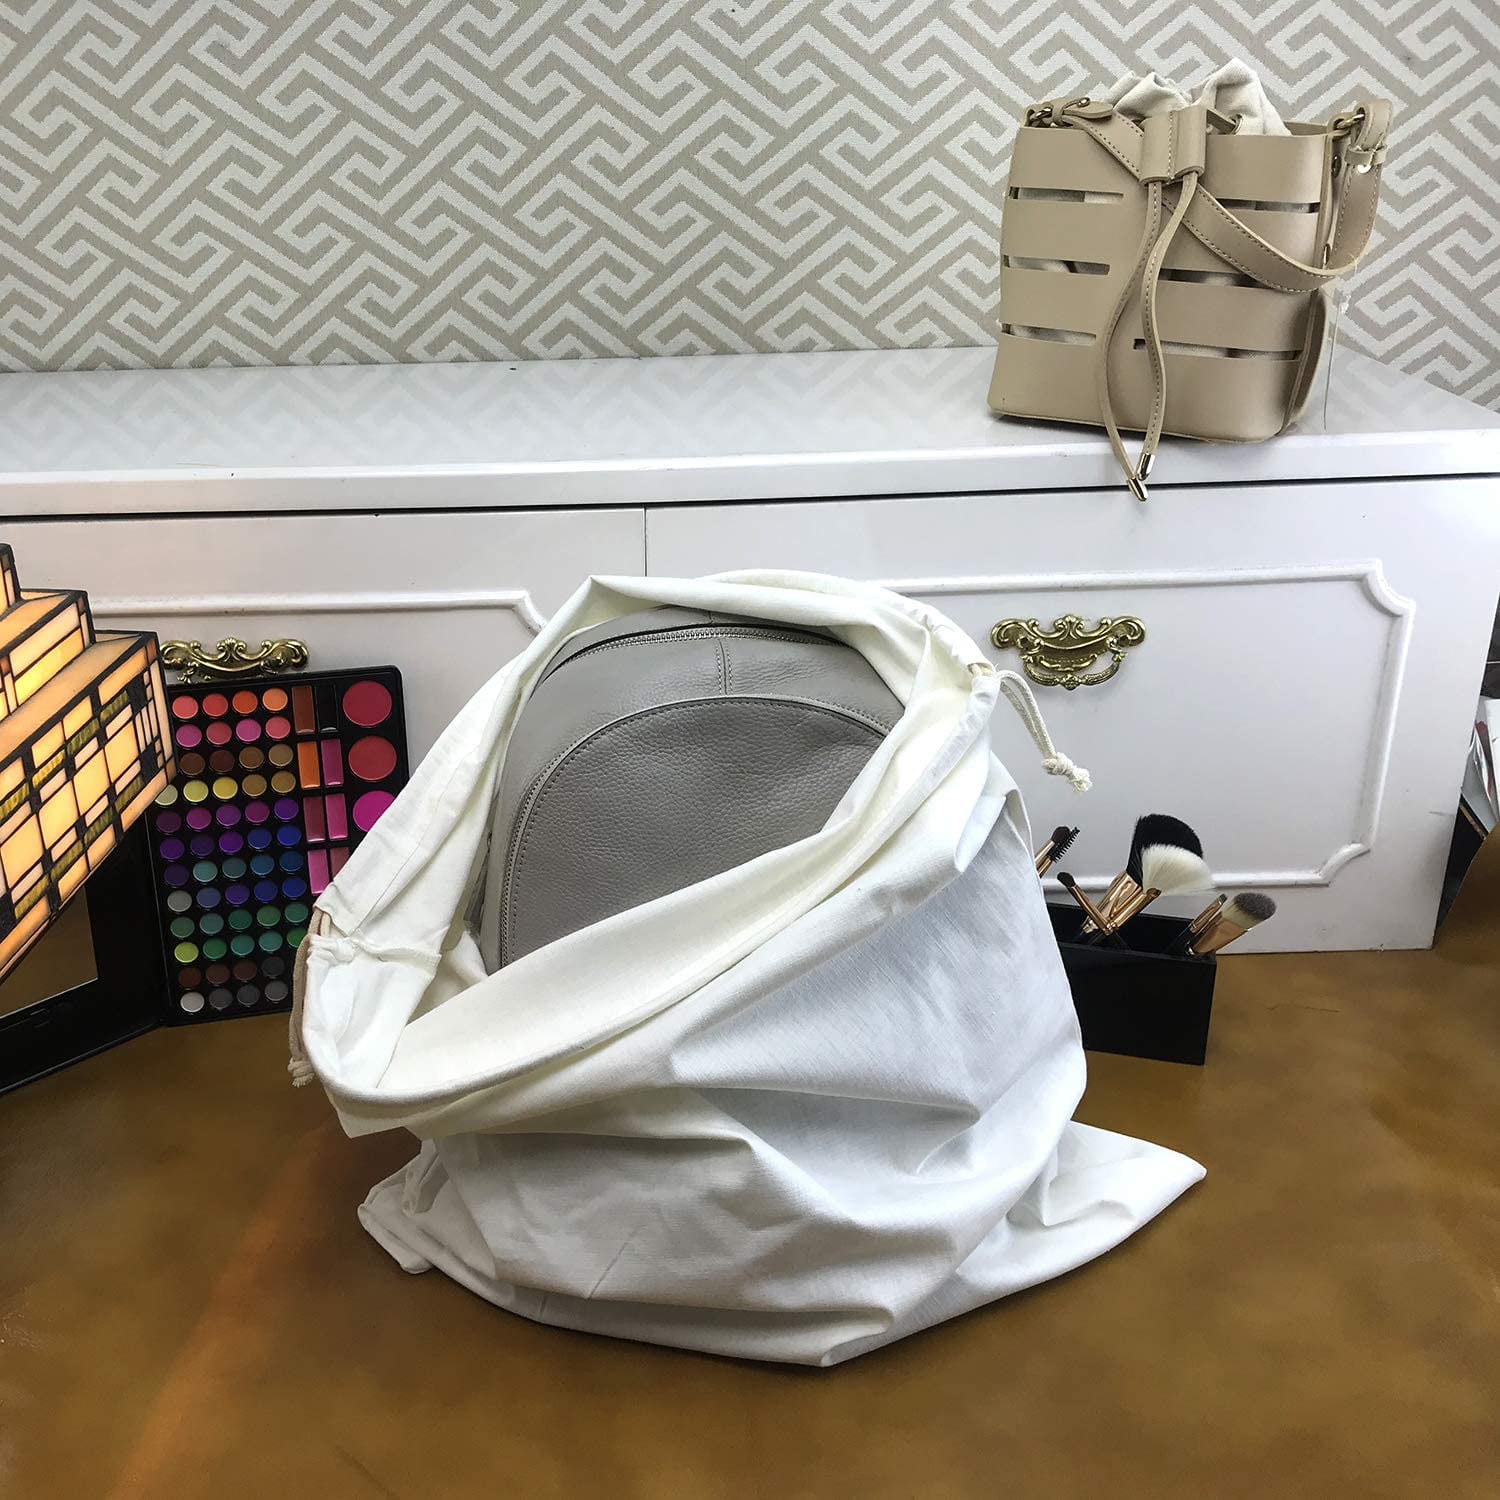 15.7x 19.6 in Dust Cover Storage Bags Elastic Cotton Cloth with Drawstring Pouch For Handbags Purses Pocketbooks Shoes Boots Set of 2 